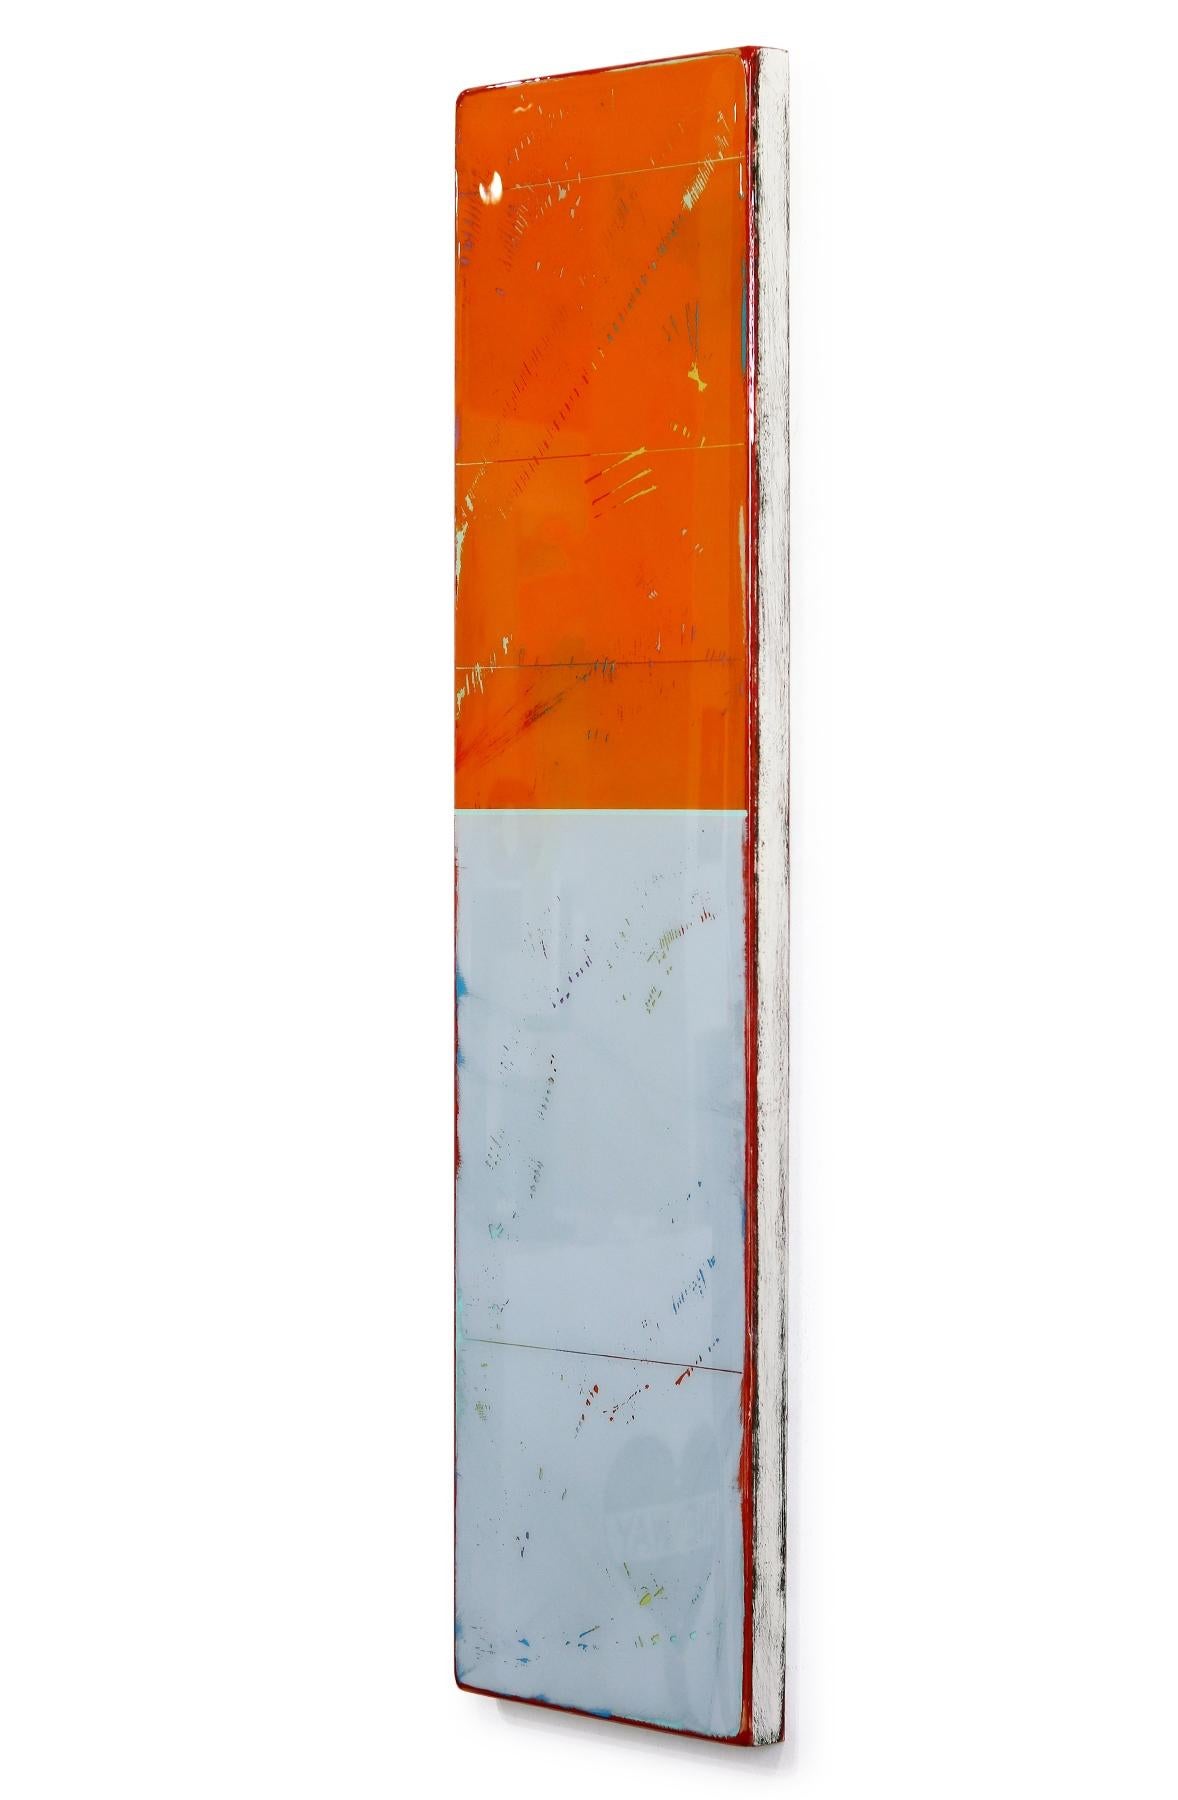 Ricky Hunt’s mixed media minimalist wall art is influenced by his tumultuous past that led to a paradigm shift in creativity and life. He covers the wood panel with layers of acrylic paint, removing some layers in the process to reveal the